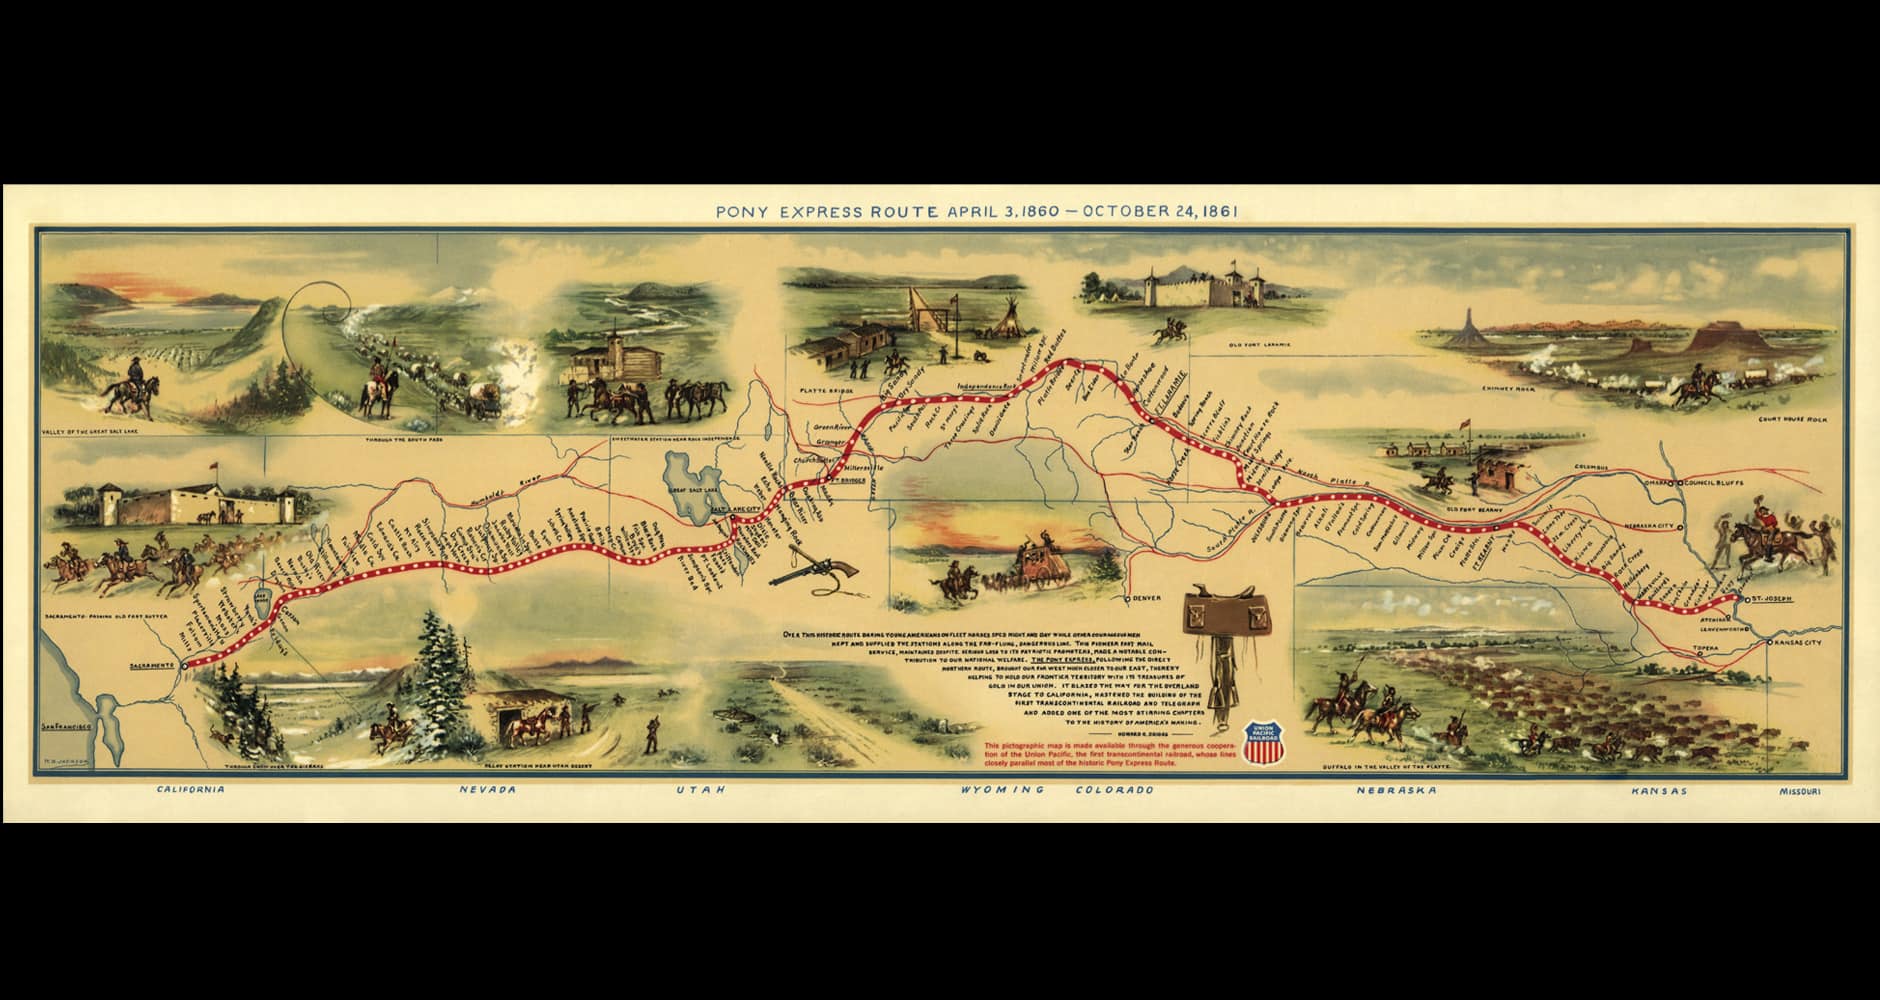 Pony express route map